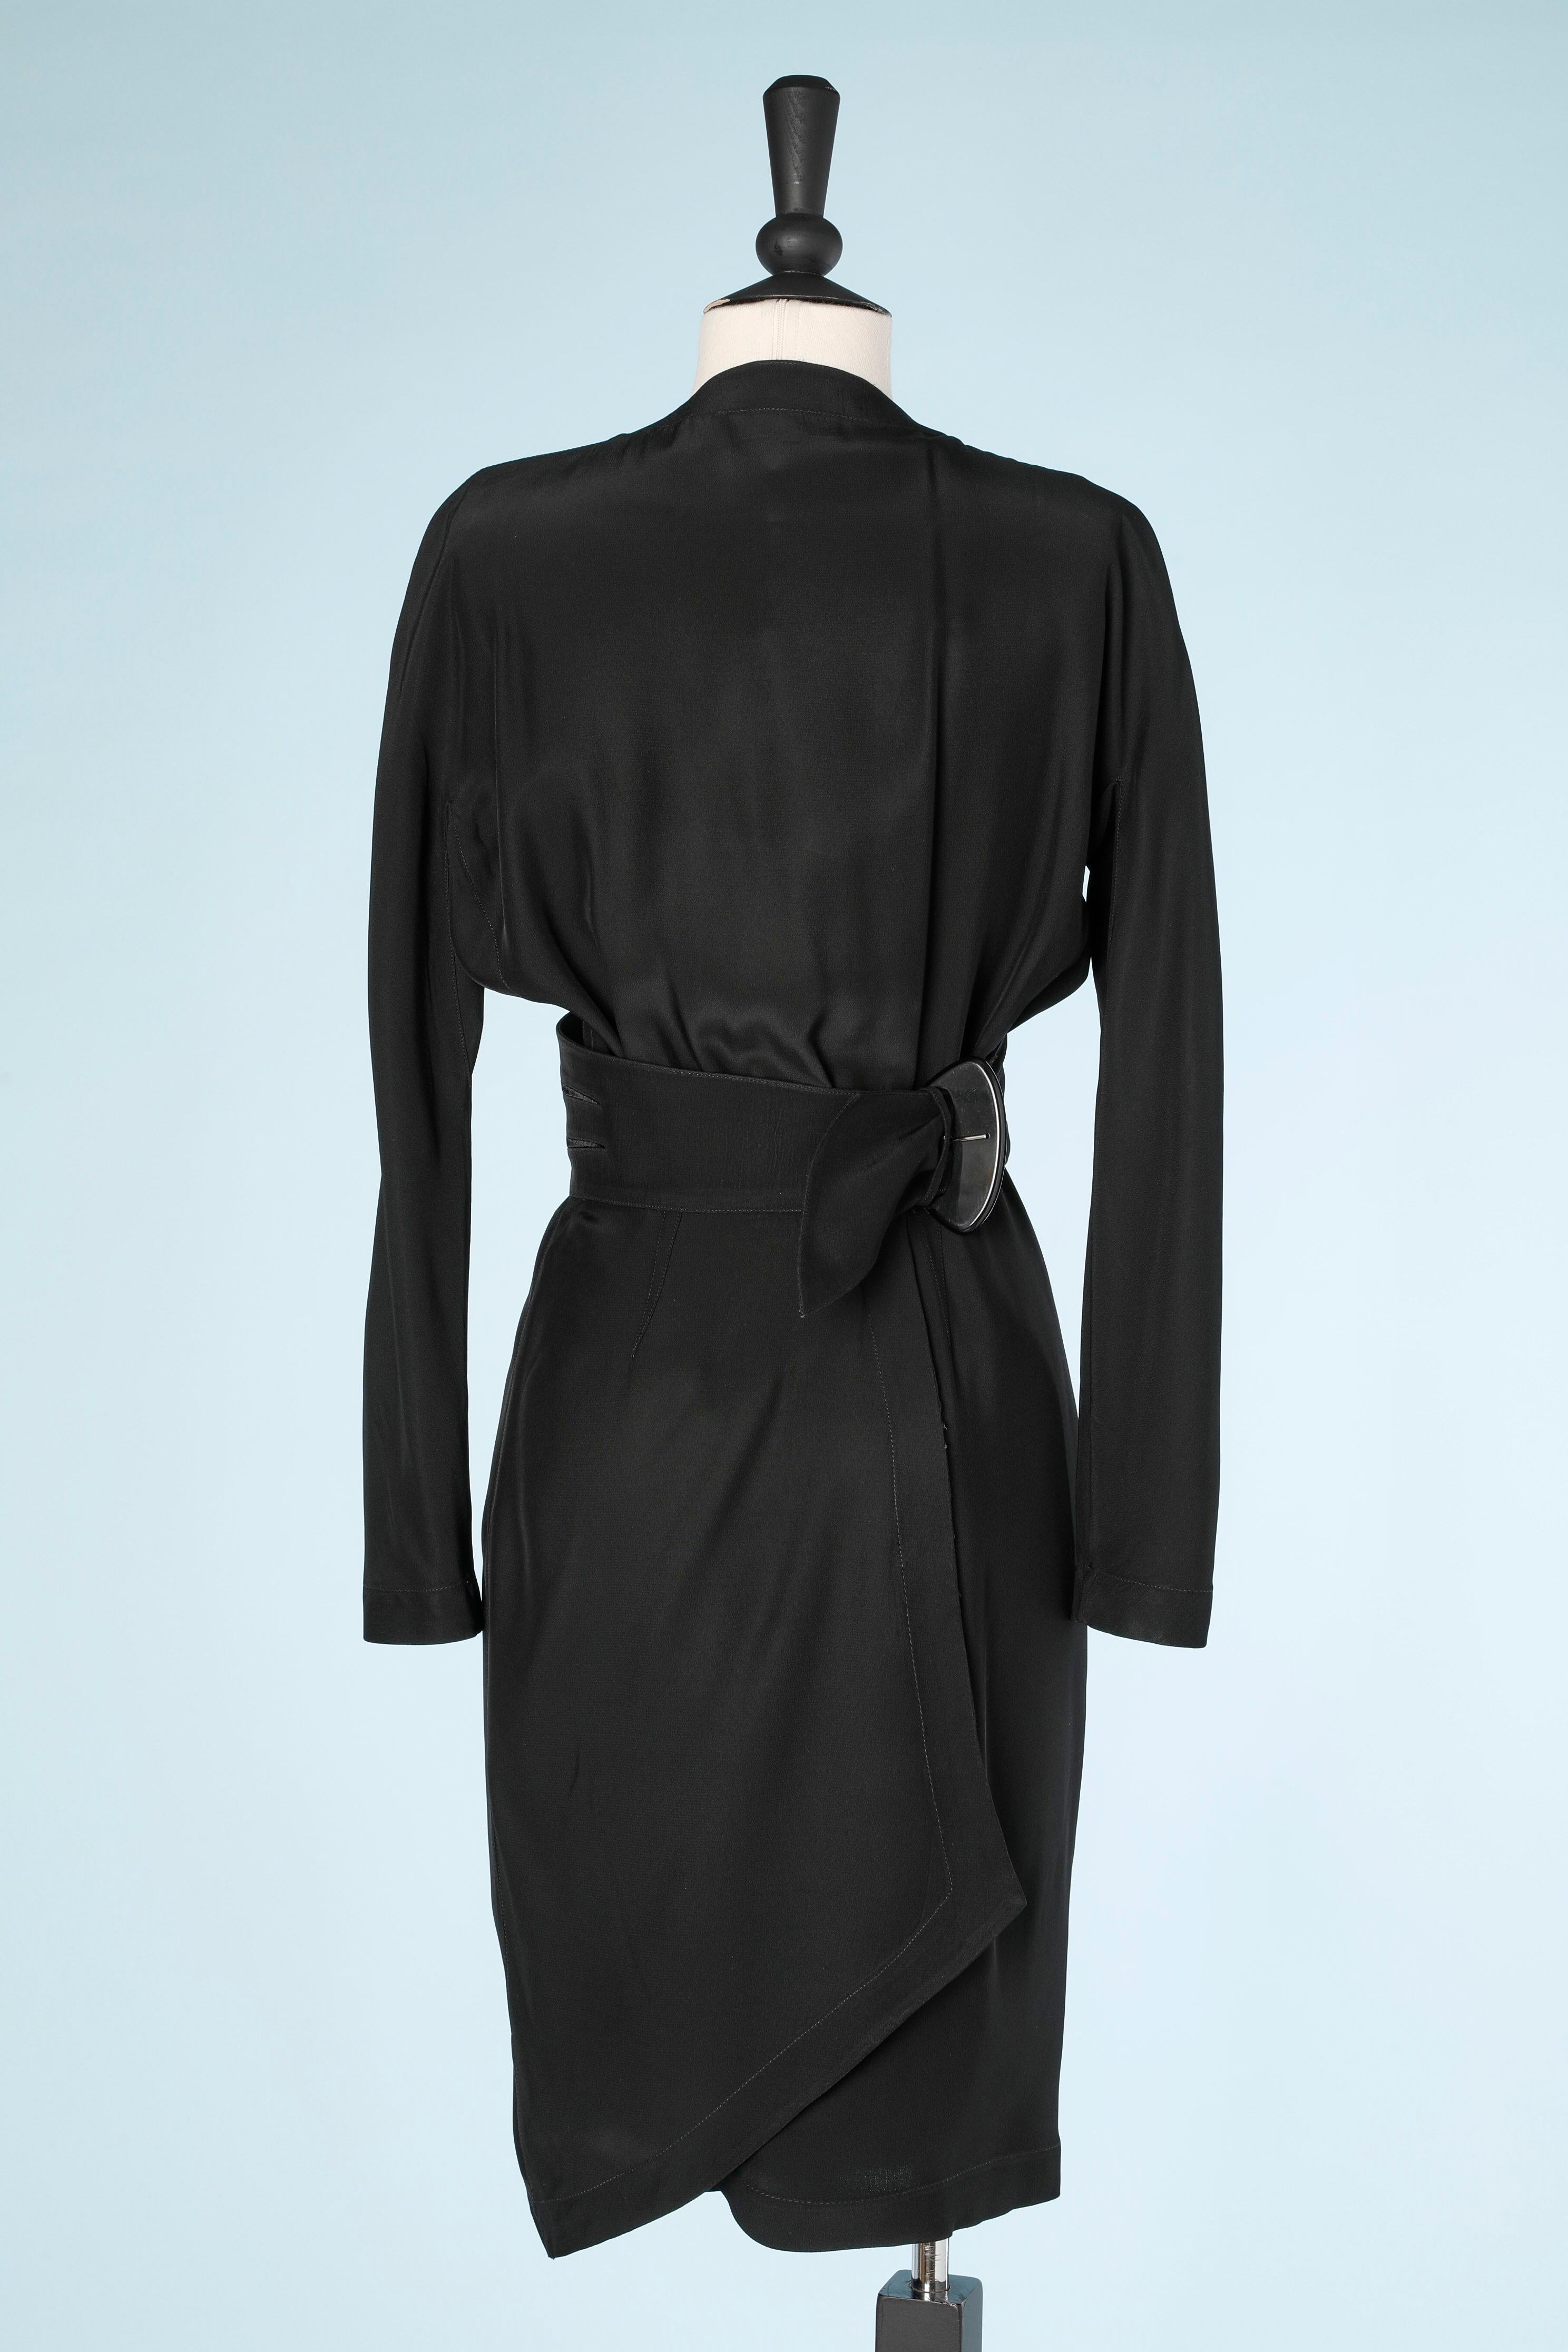 Black cocktail dress in satin crepe and velvet cutting Thierry Mugler  For Sale 3